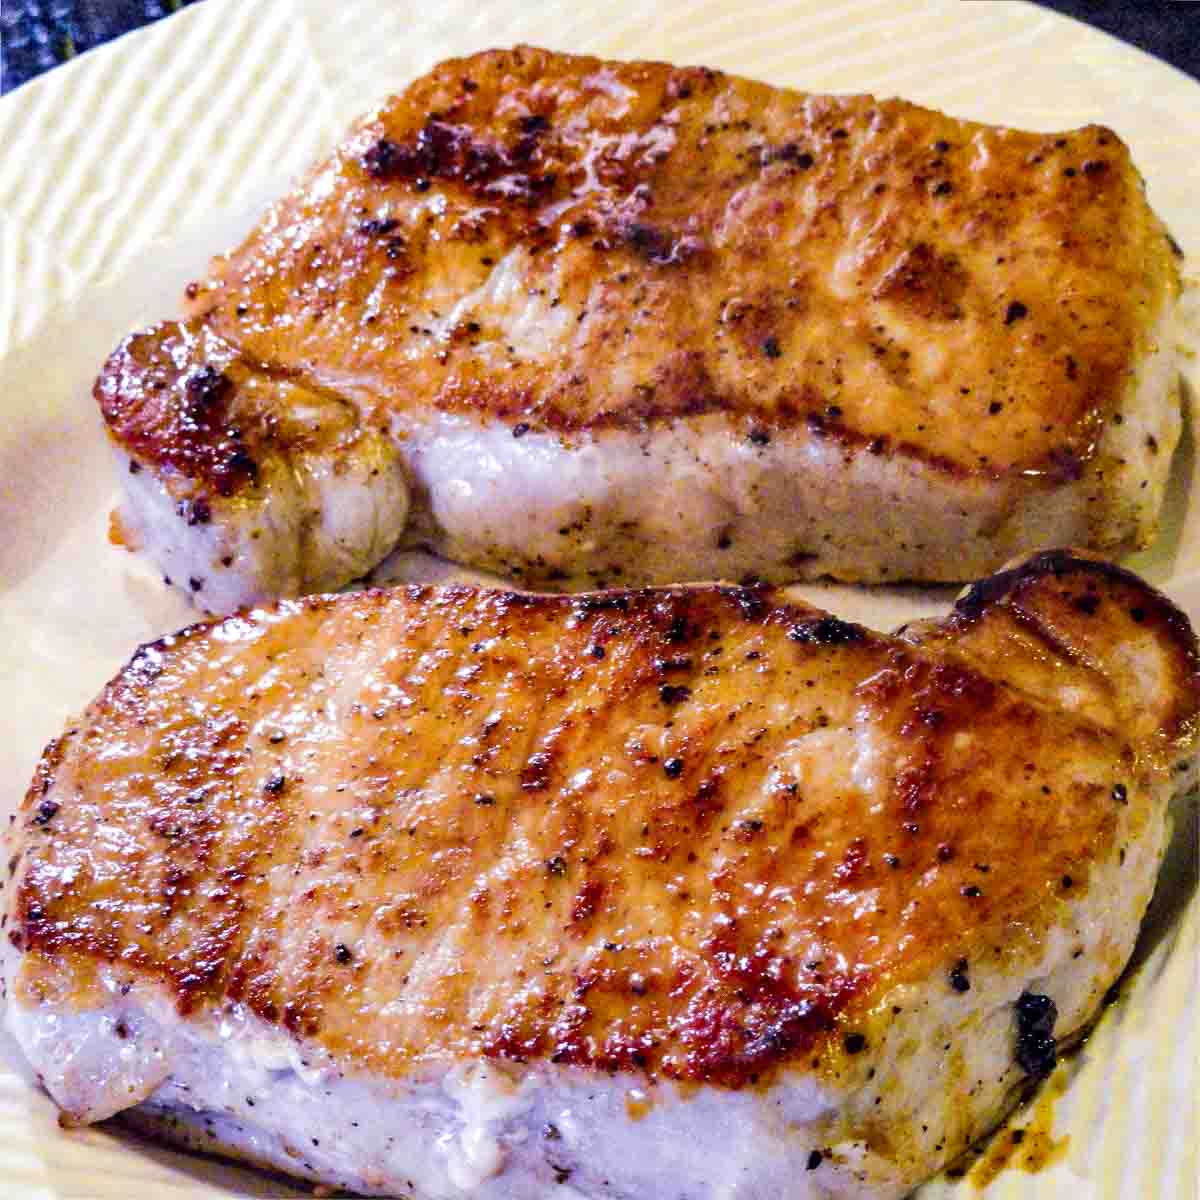 Pan Seared Oven Roasted Pork Chops 101 Cooking For Two,Nintendo Wii Games For Kids